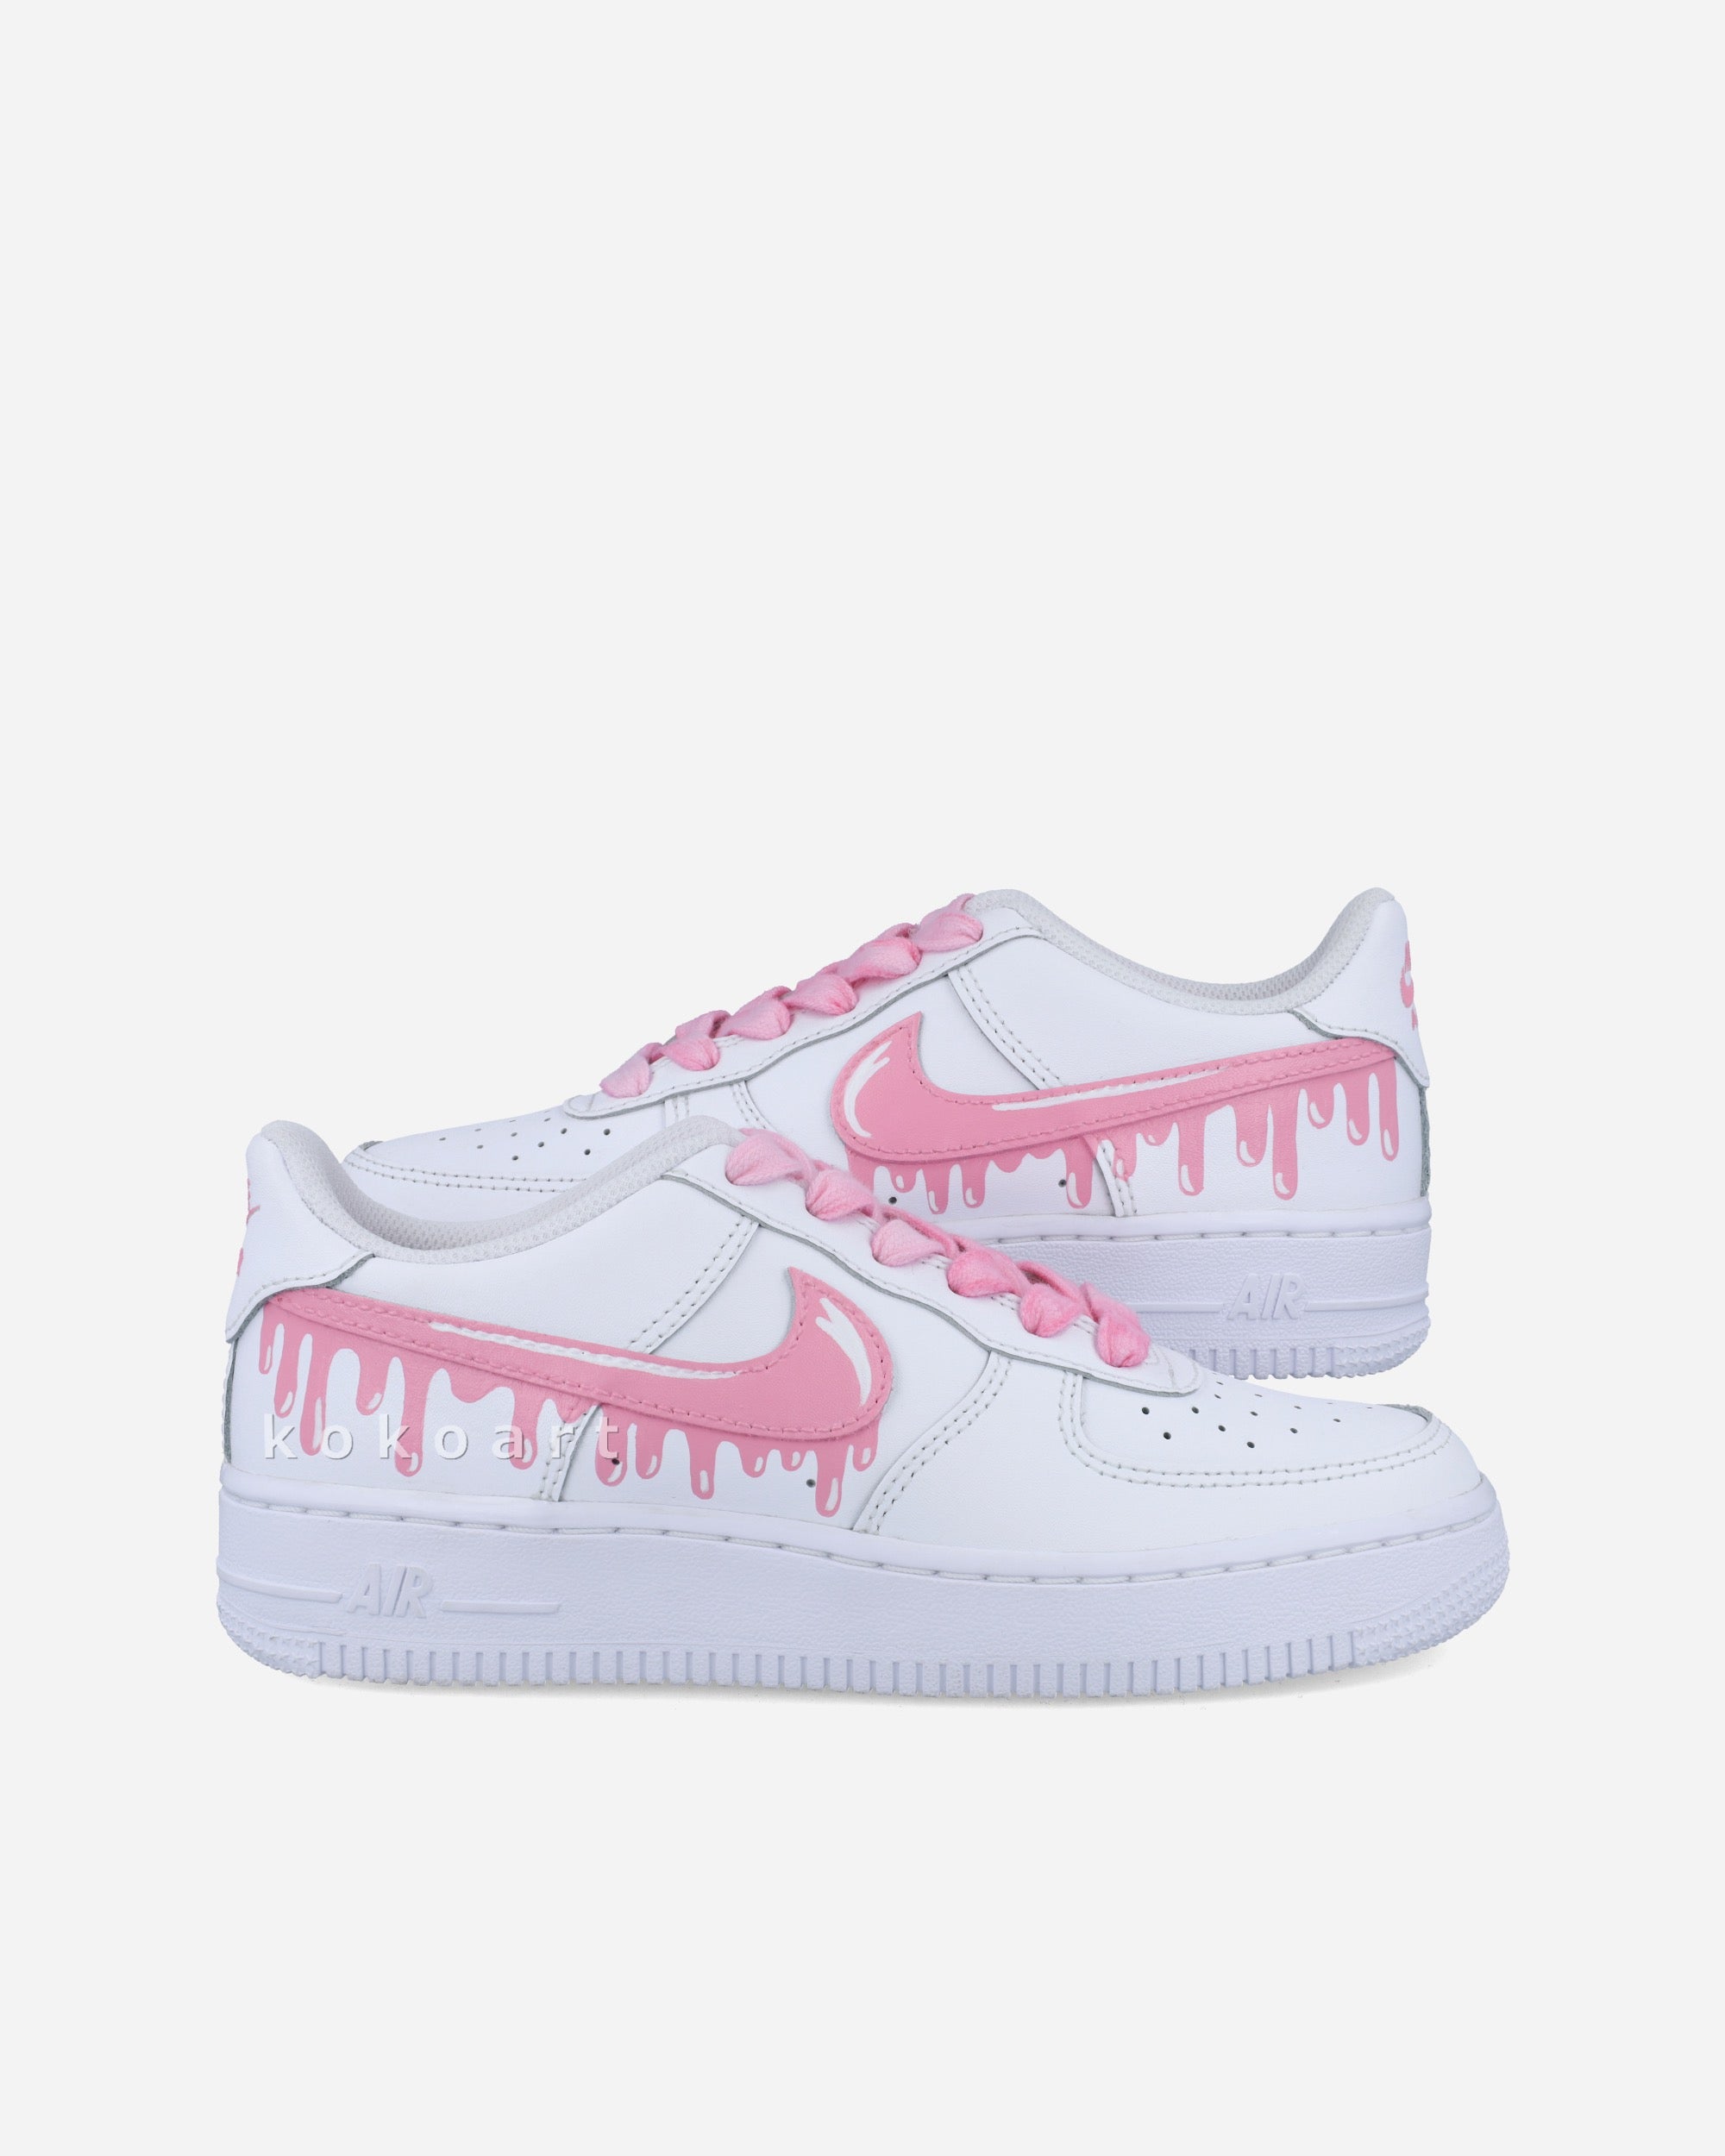 AF1 Candy Pink Dripping